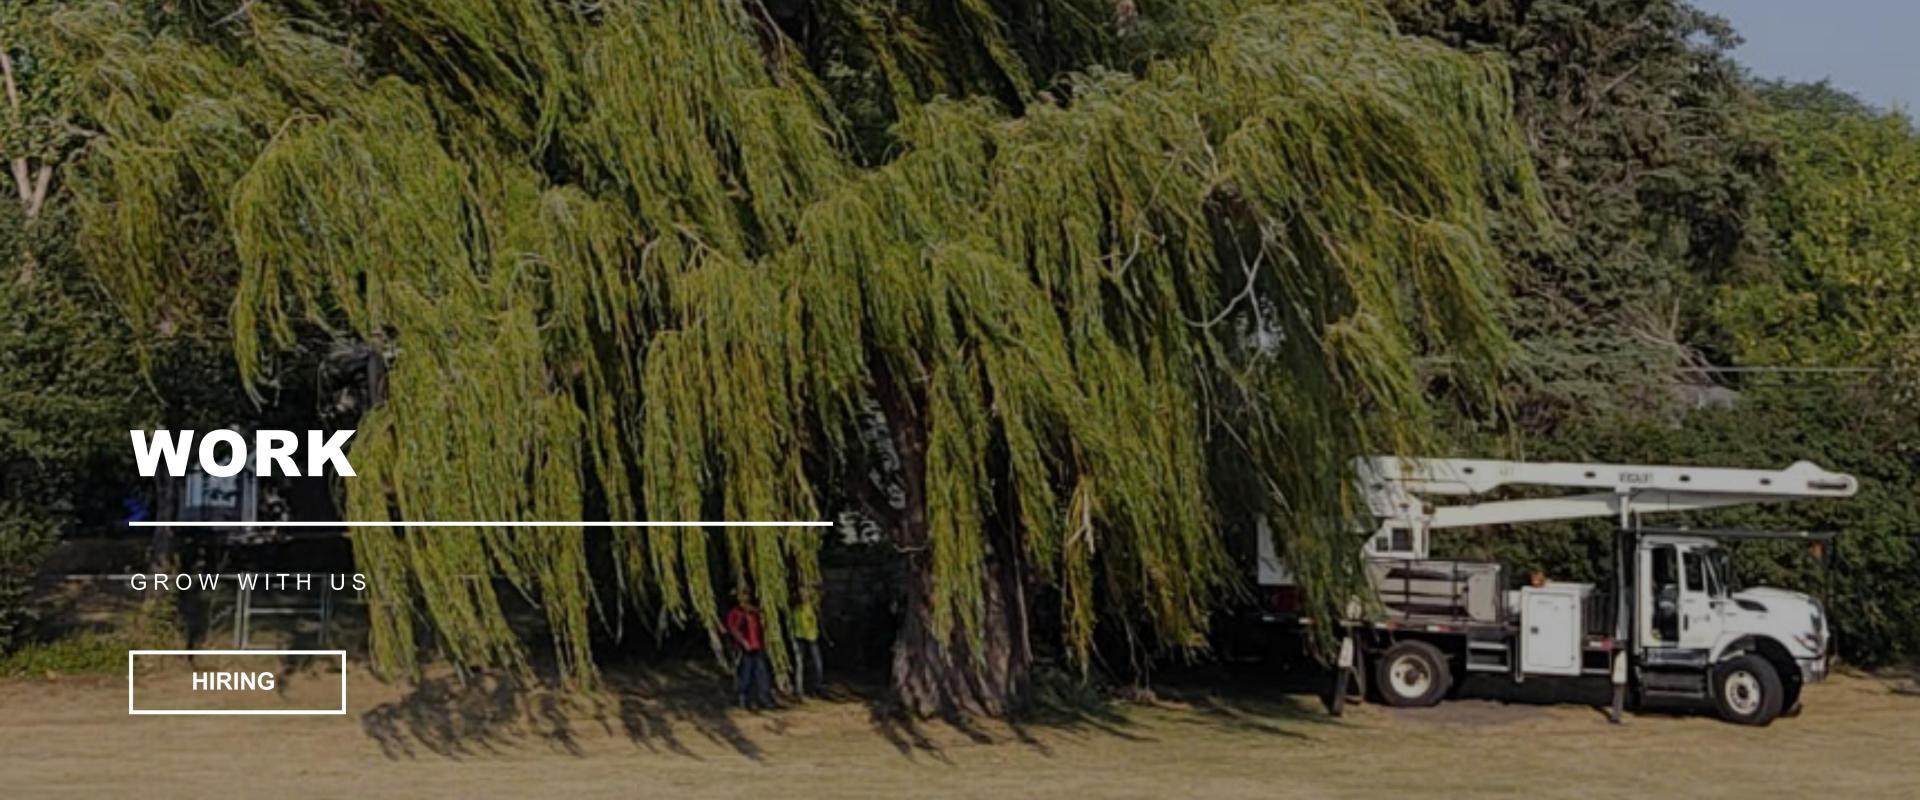 WORK - Grow with us - image of willow tree and a Fargo Parks truck under some branches